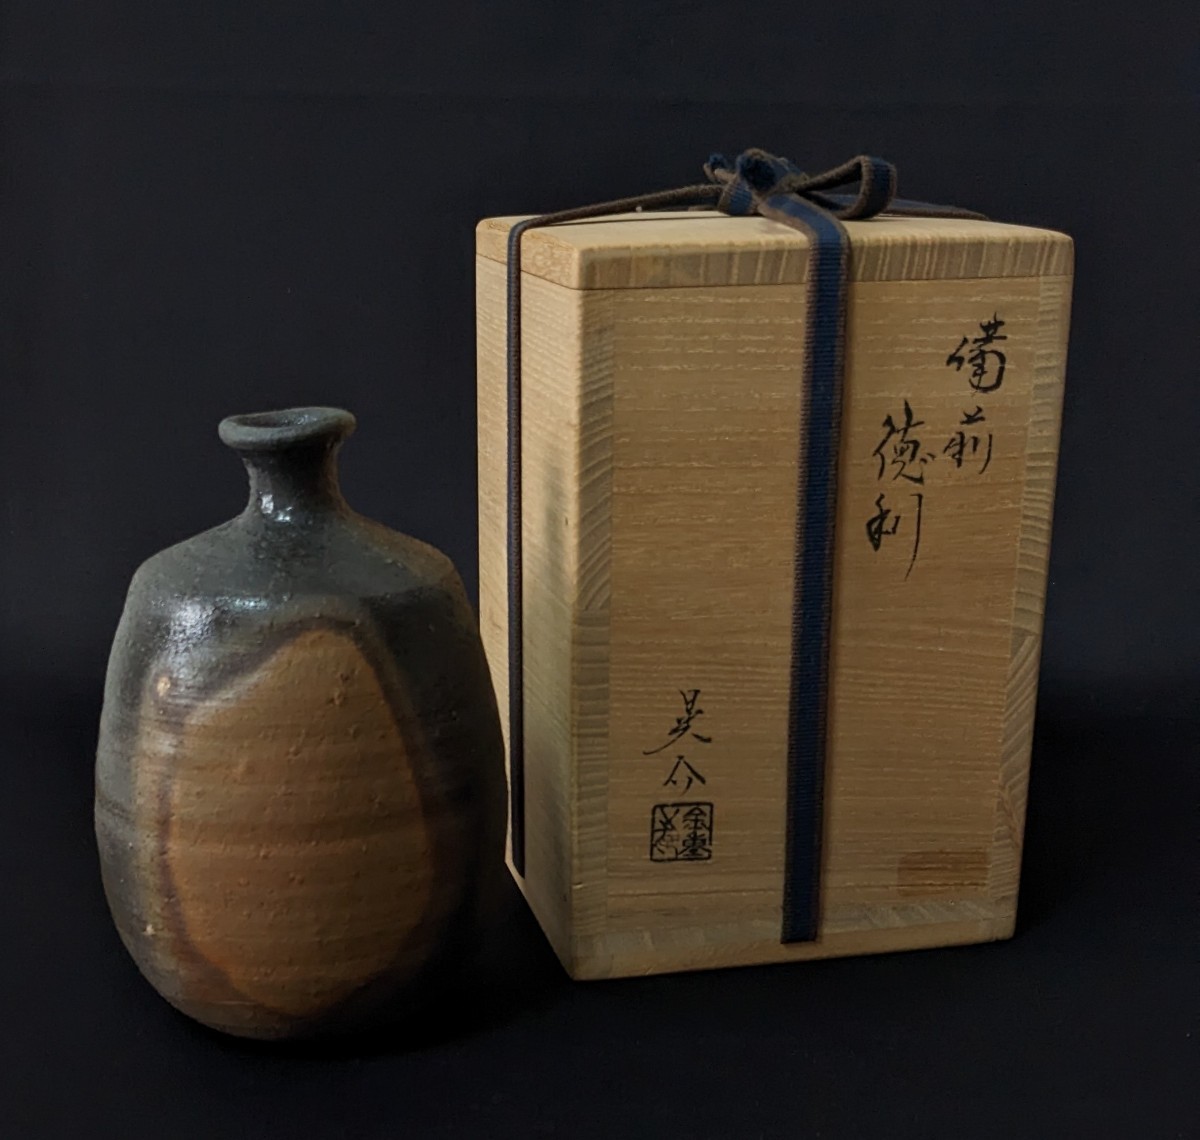 3490 Bizen . gold -ply .. sake bottle also box prefecture designation important less shape culture fortune gold -ply .... sake cup and bottle 